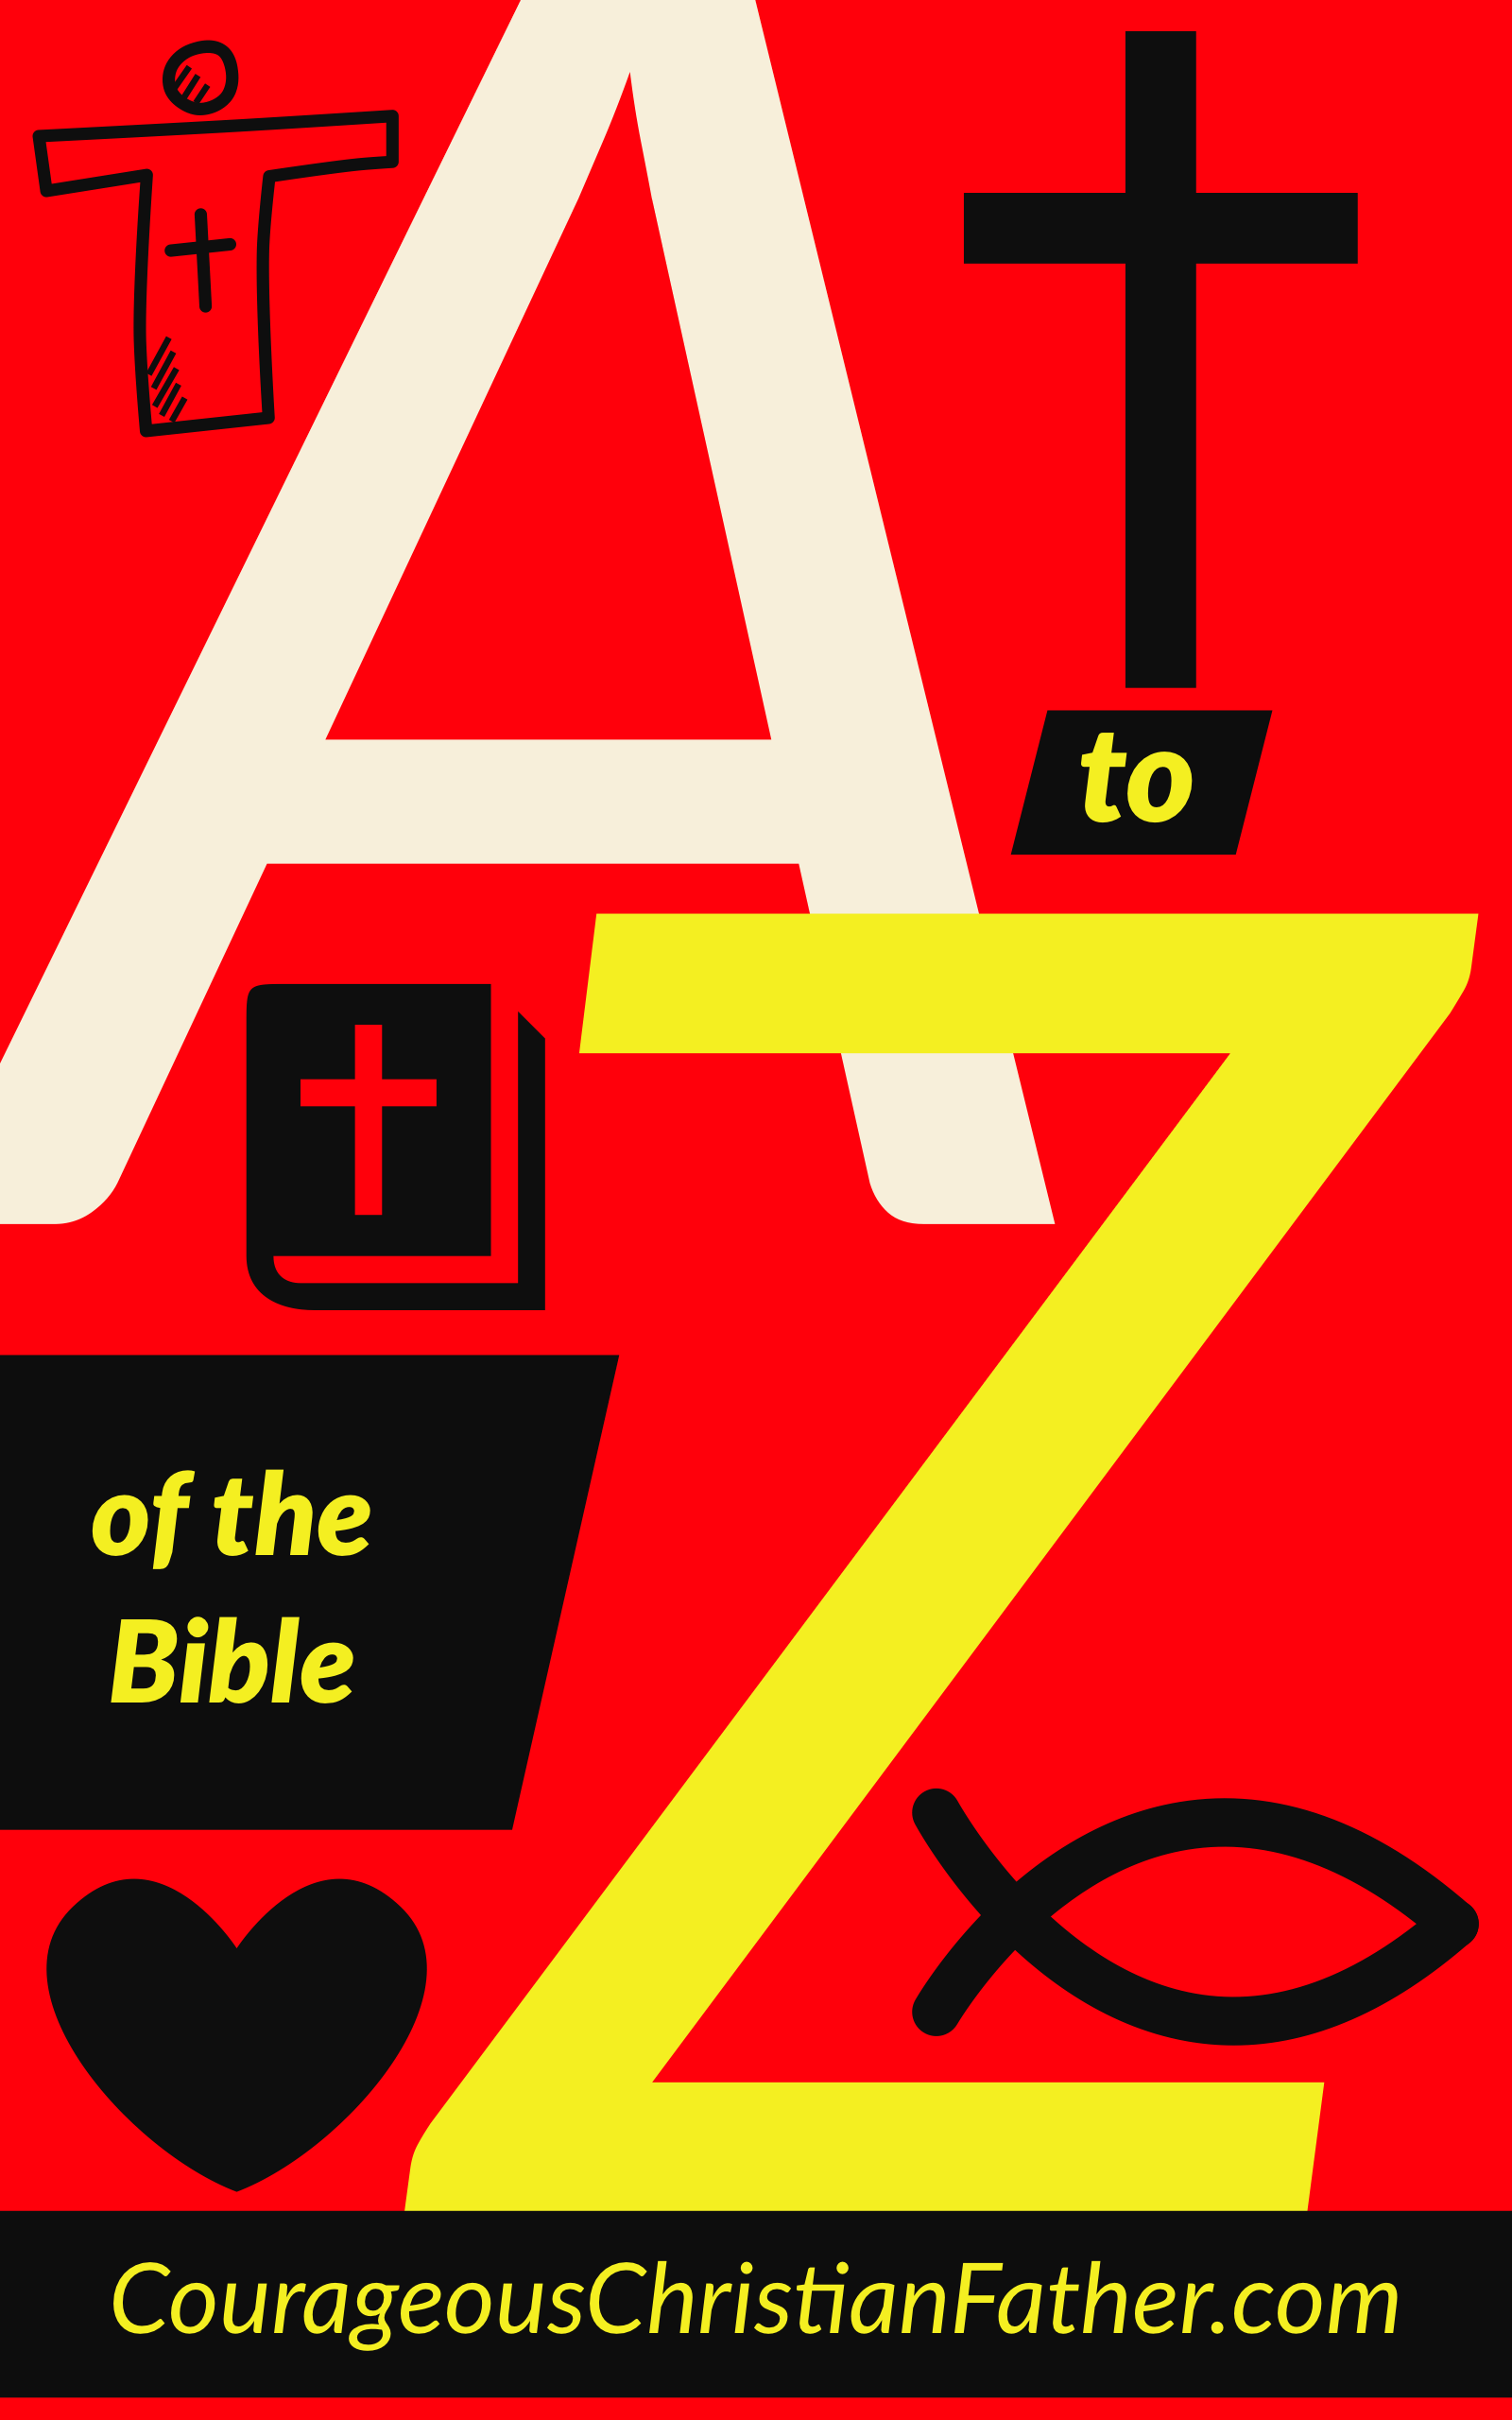 The A-Z of the Bible - Using each letter of the alphabet, I am going to share something about the Bible for each one. It could be a Book of the Bible, Geographical place or Bible Character, etc. #Bible #BGBG2